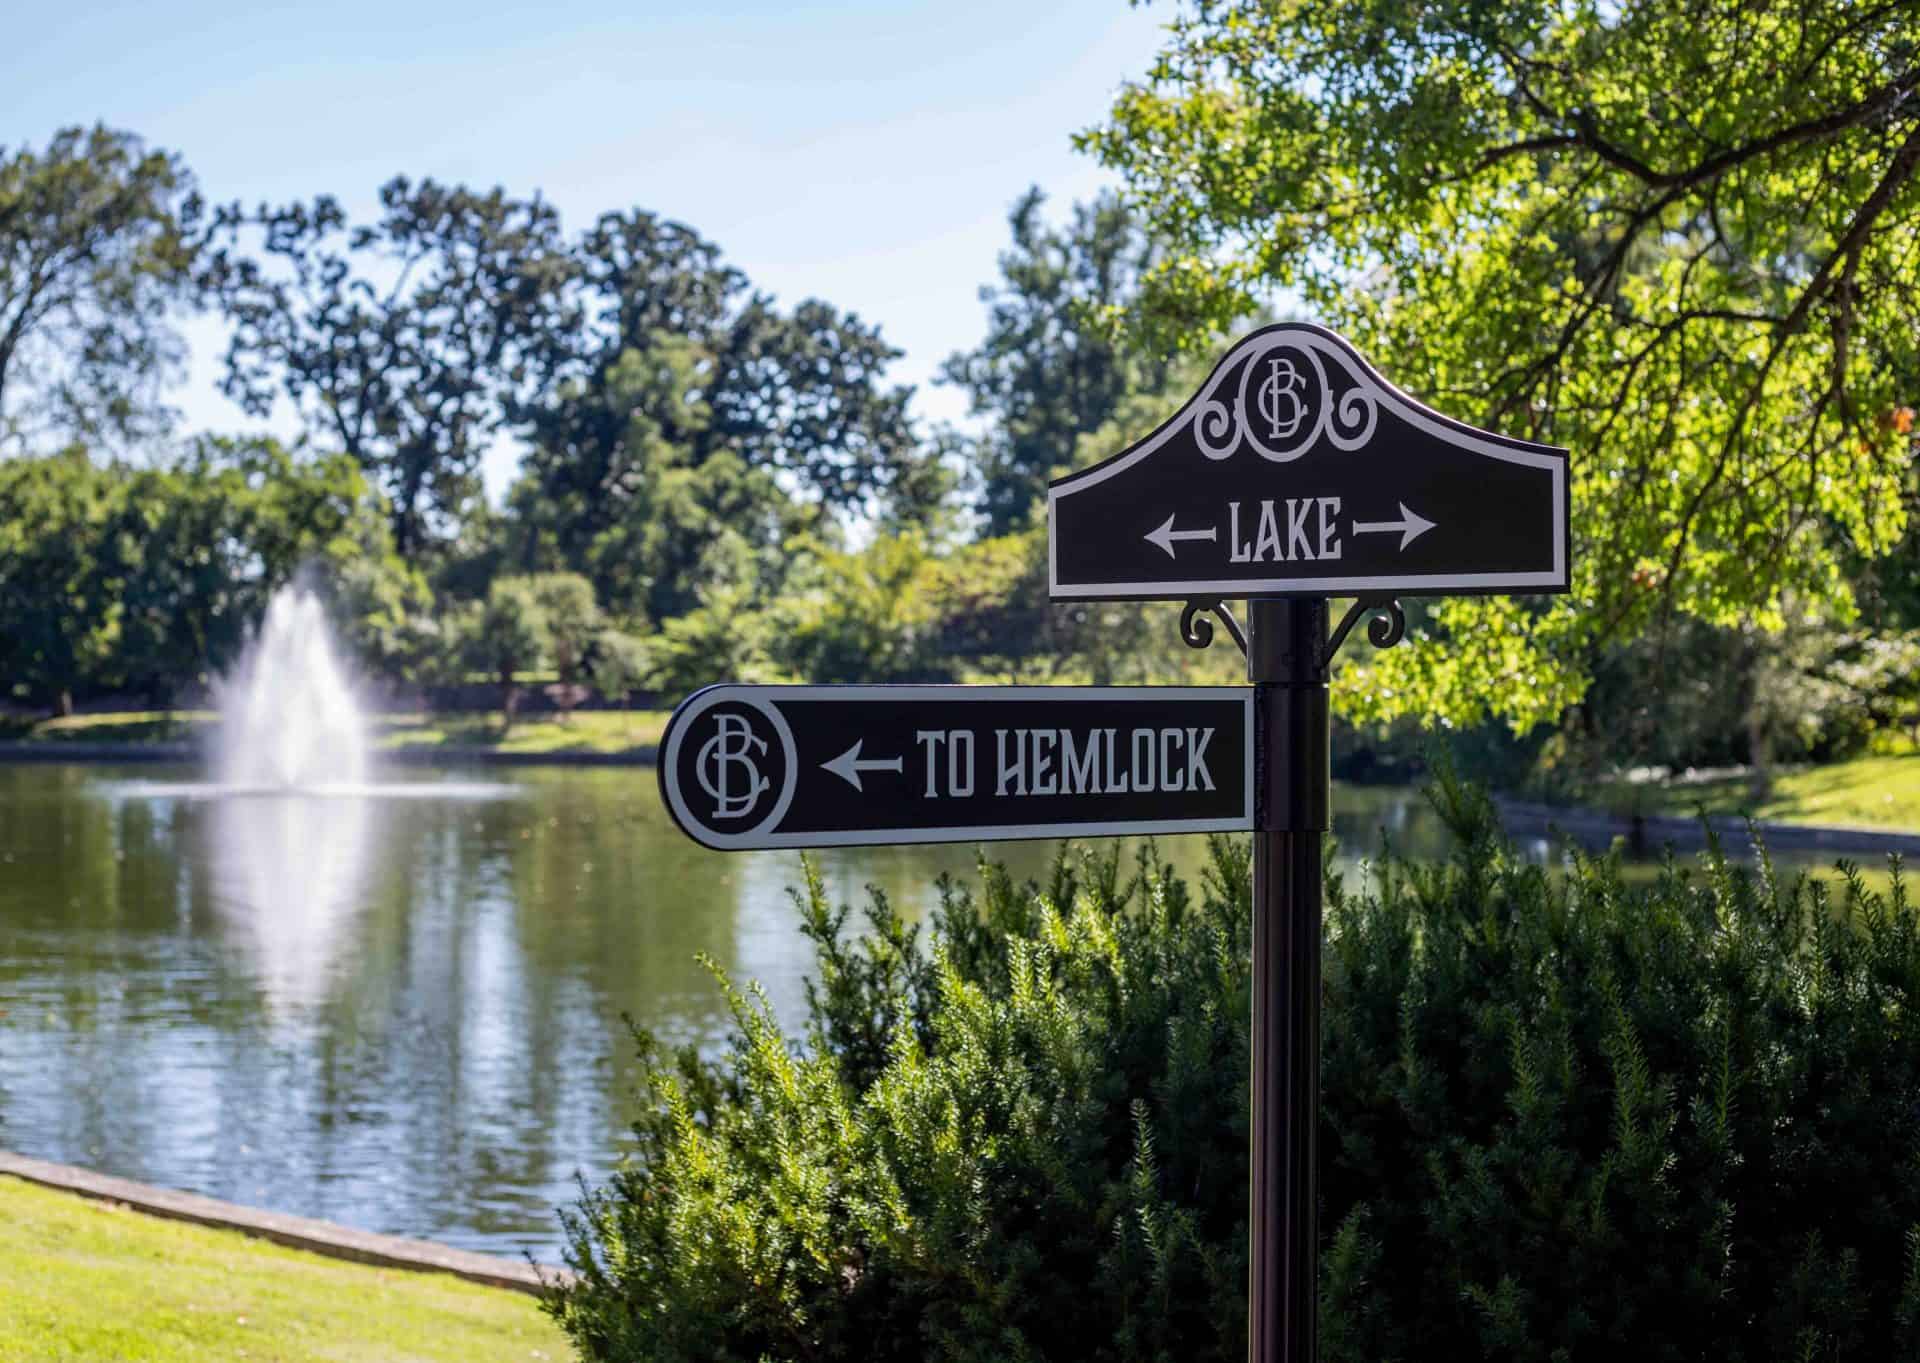 directional signs for cemetery and arboretum